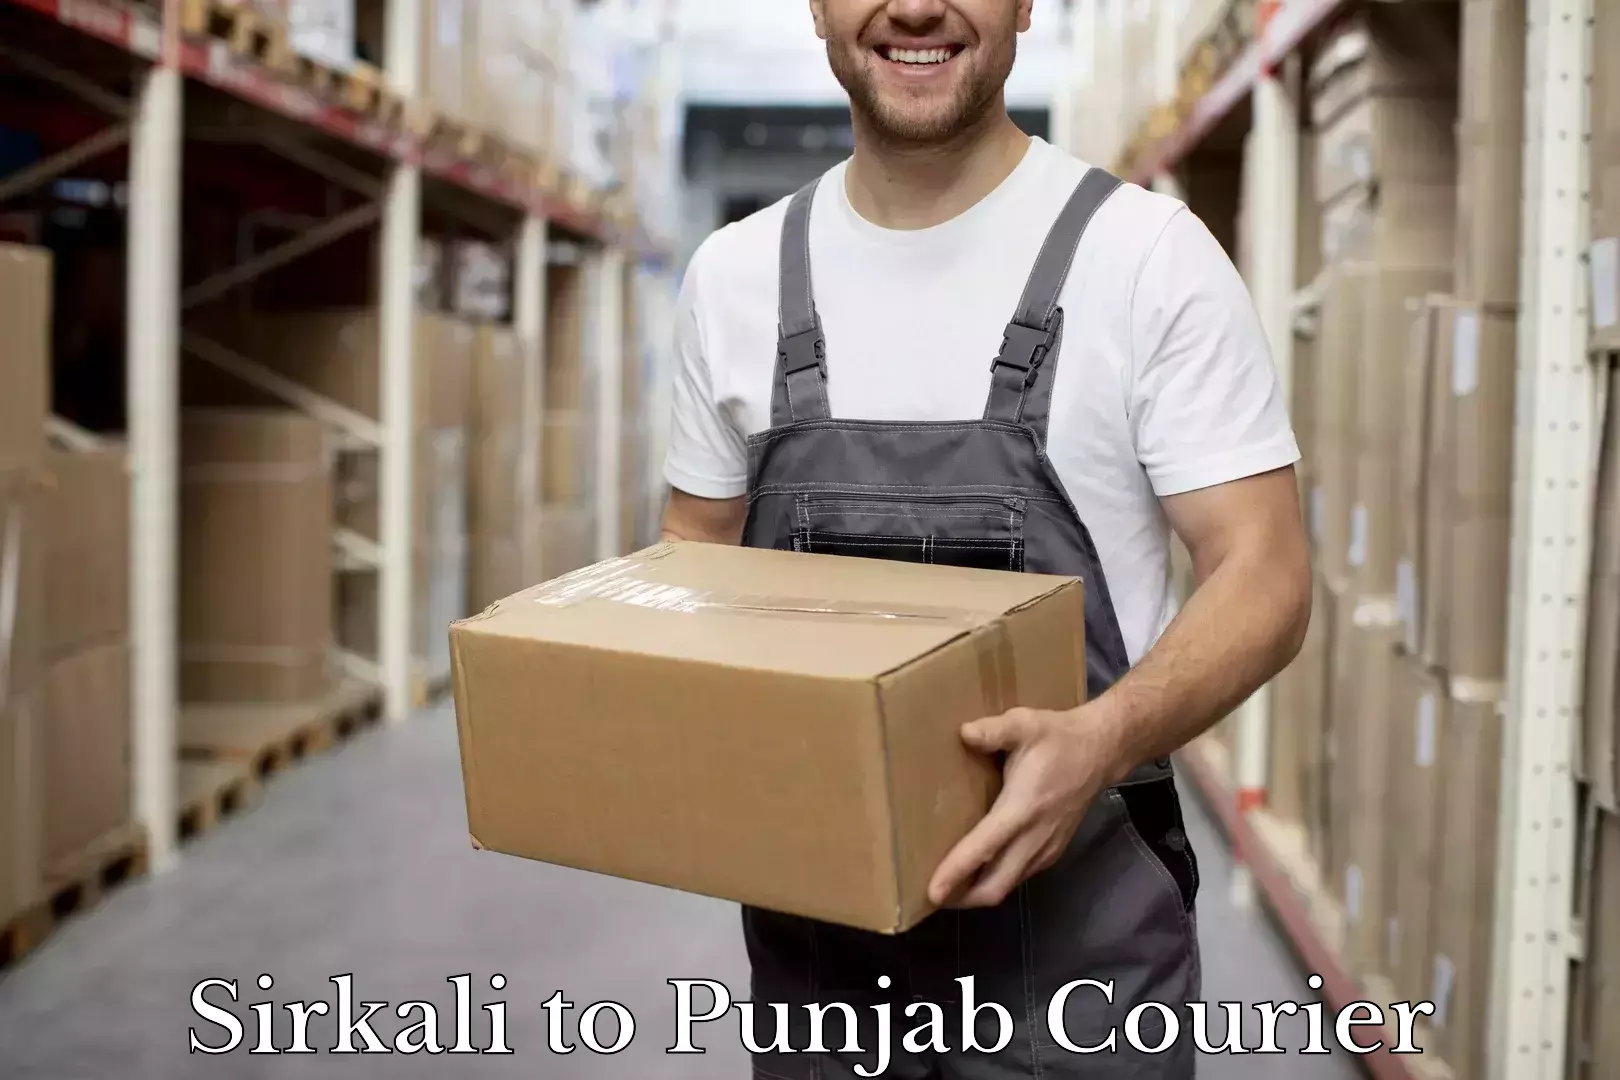 Luggage delivery app Sirkali to Punjab